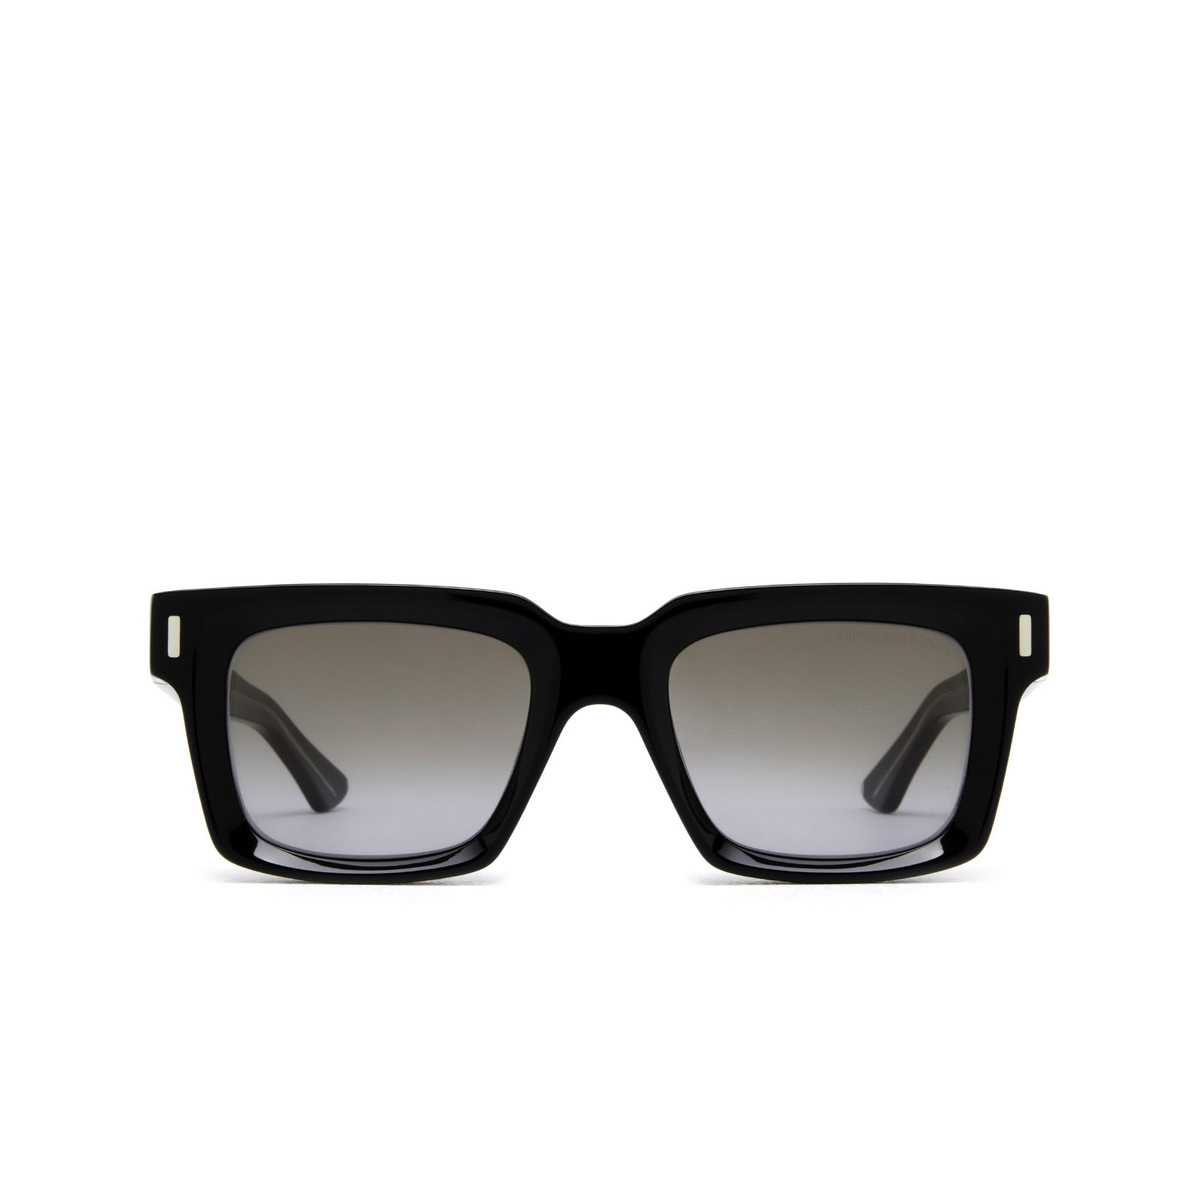 Cutler and Gross 1386 Sunglasses 01 Black - front view